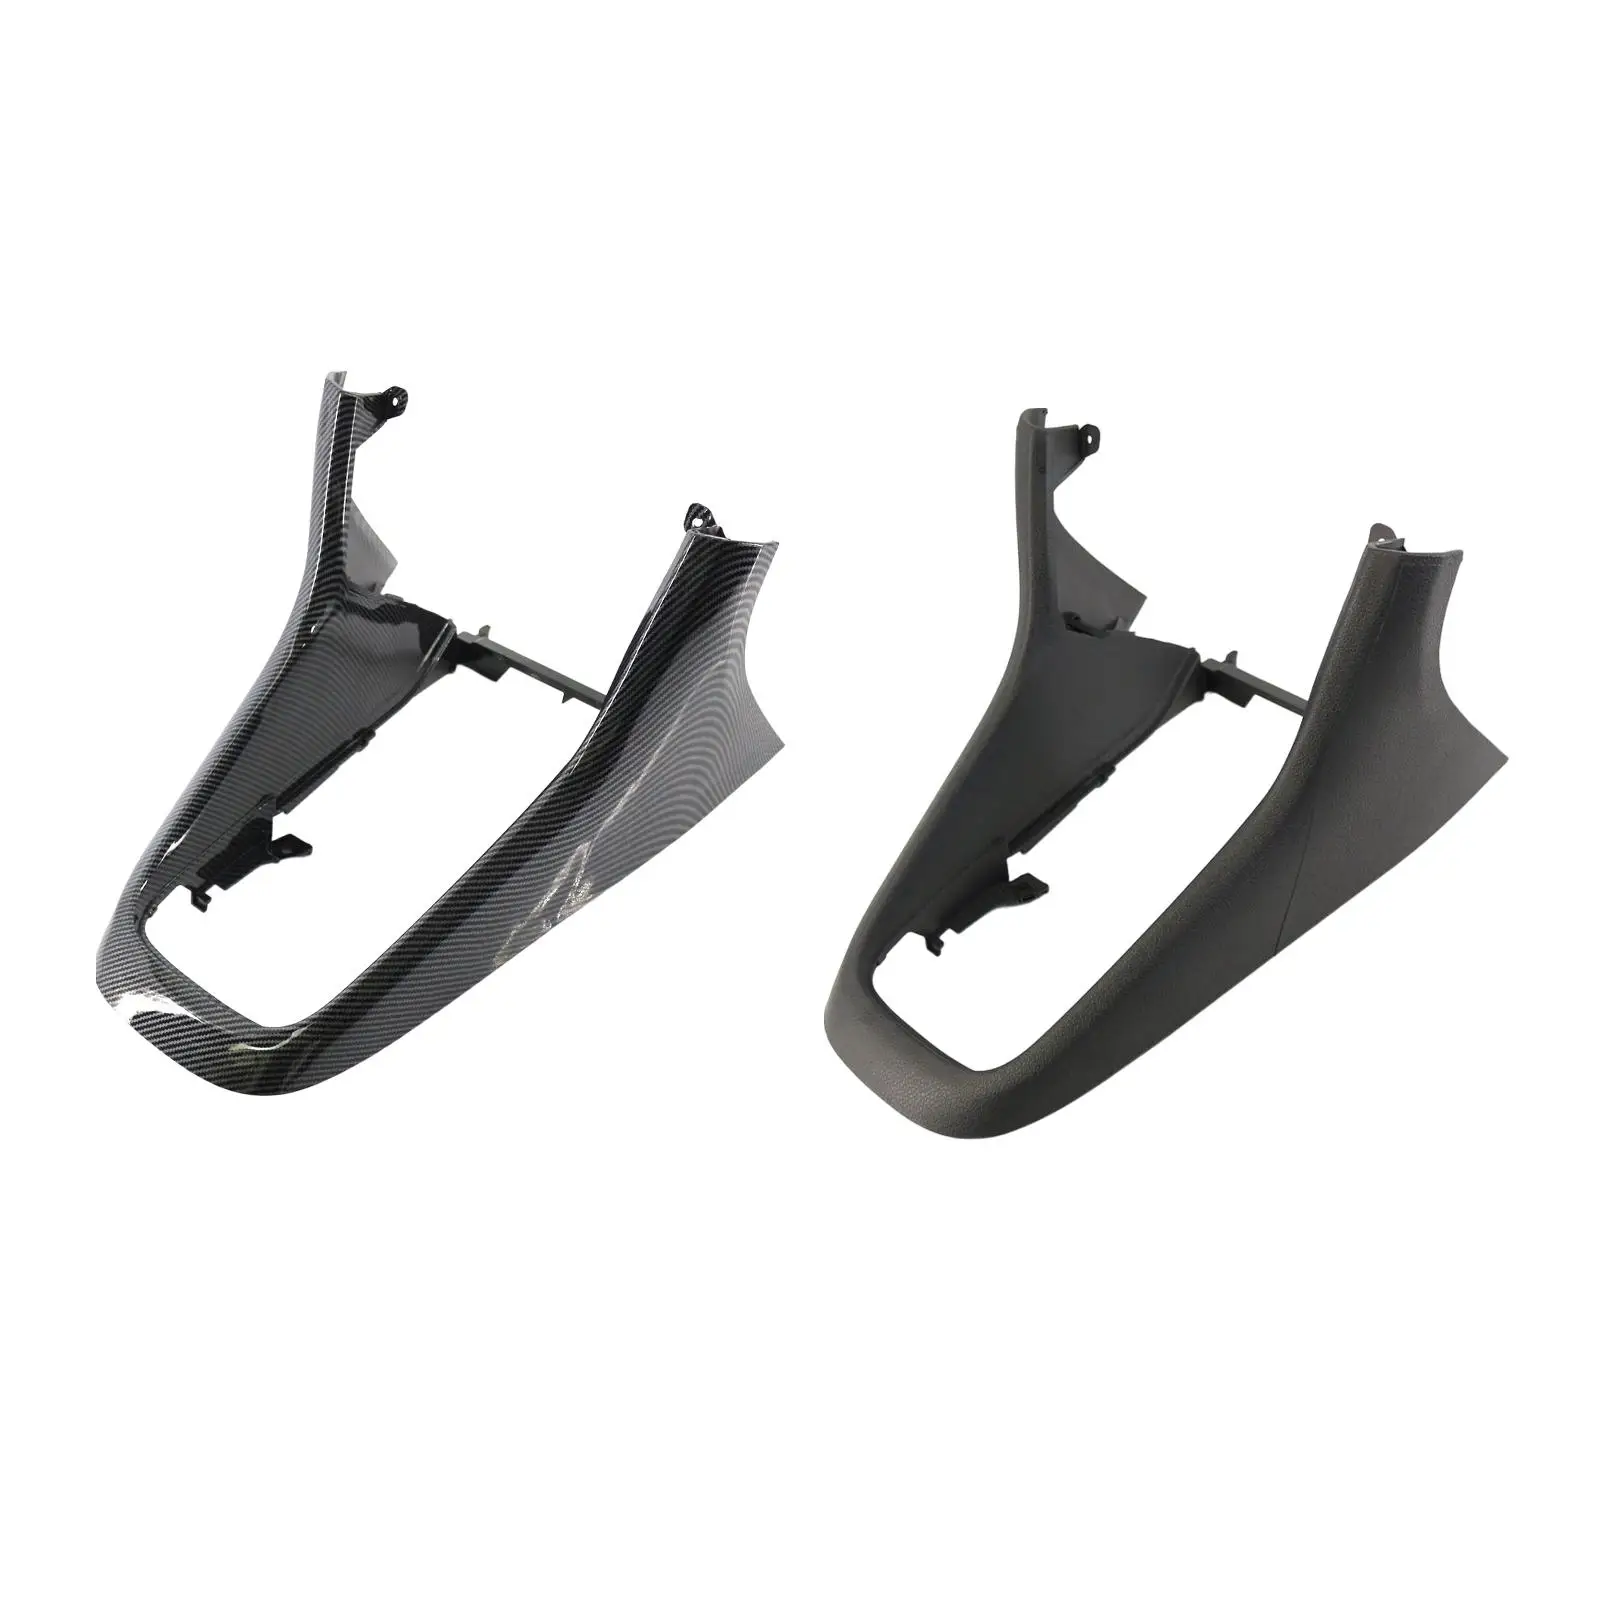 5K0863680 Front Console Cover for VW Golf MK6 Easy to Install Accessories High performance